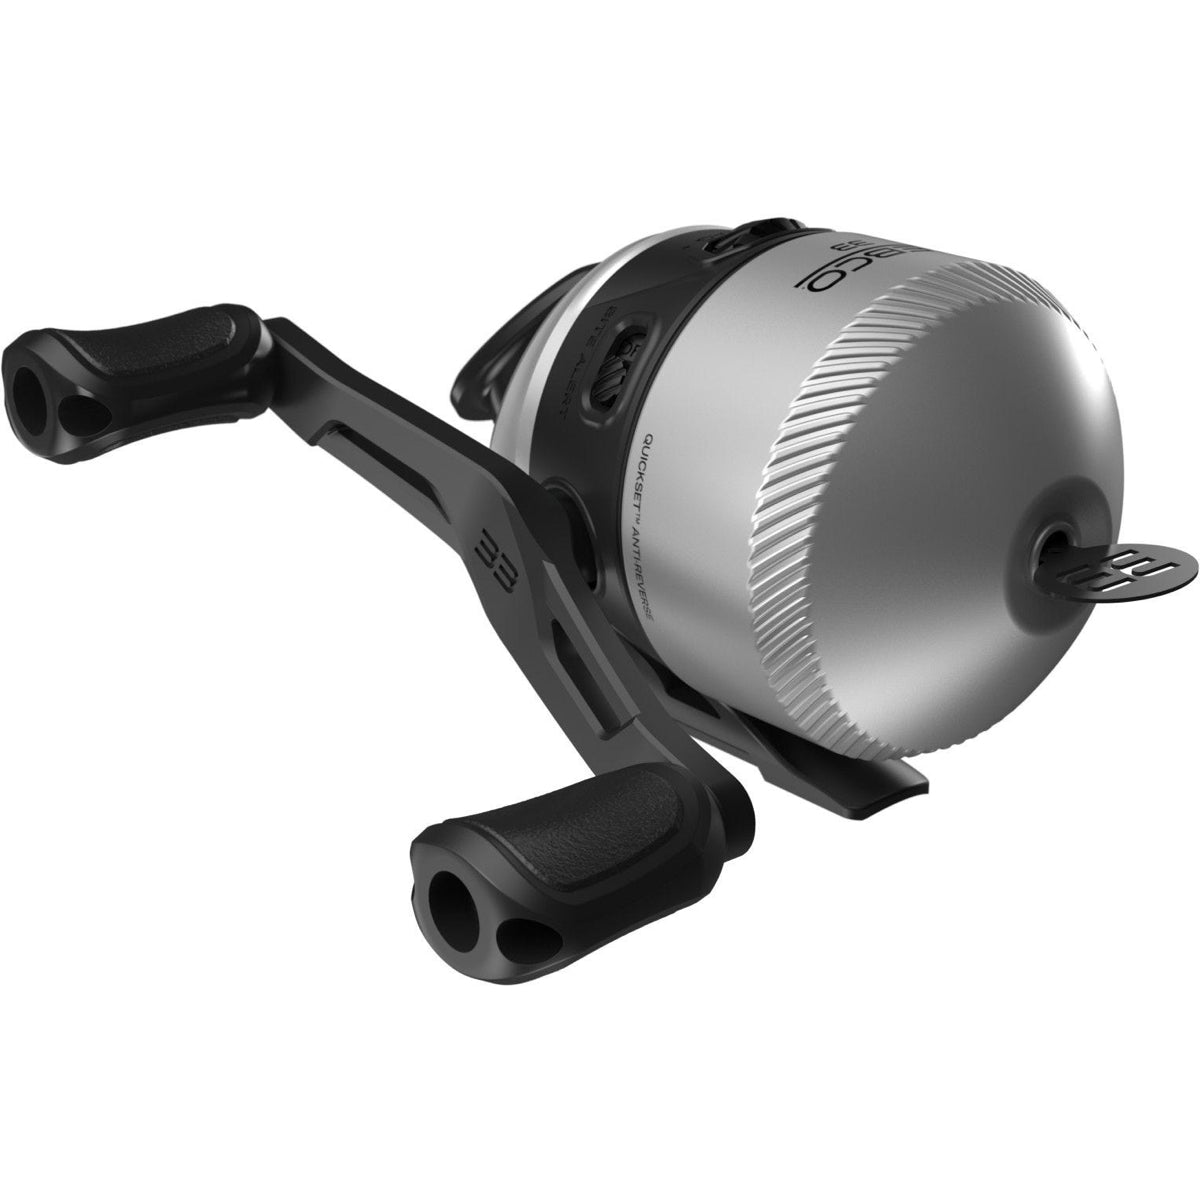 Photo of Zebco 33N Authentic Spincast Reel for sale at United Tackle Shops.